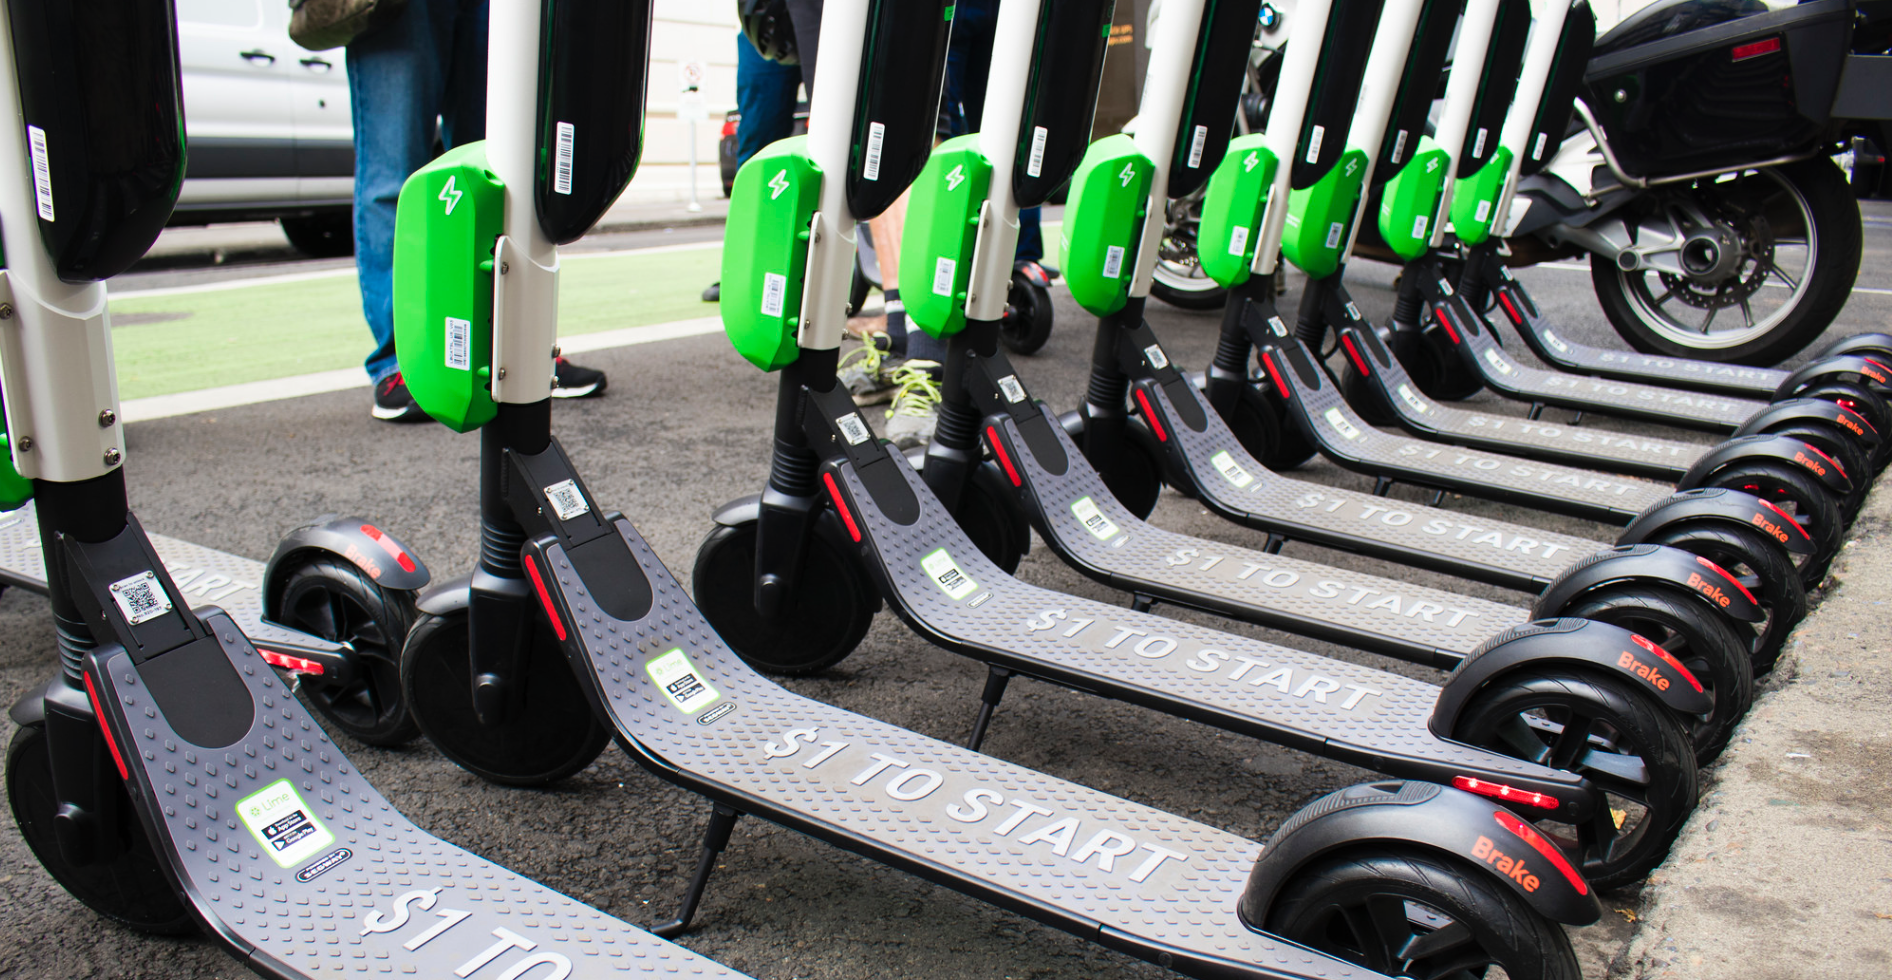 Row of dockless scooters